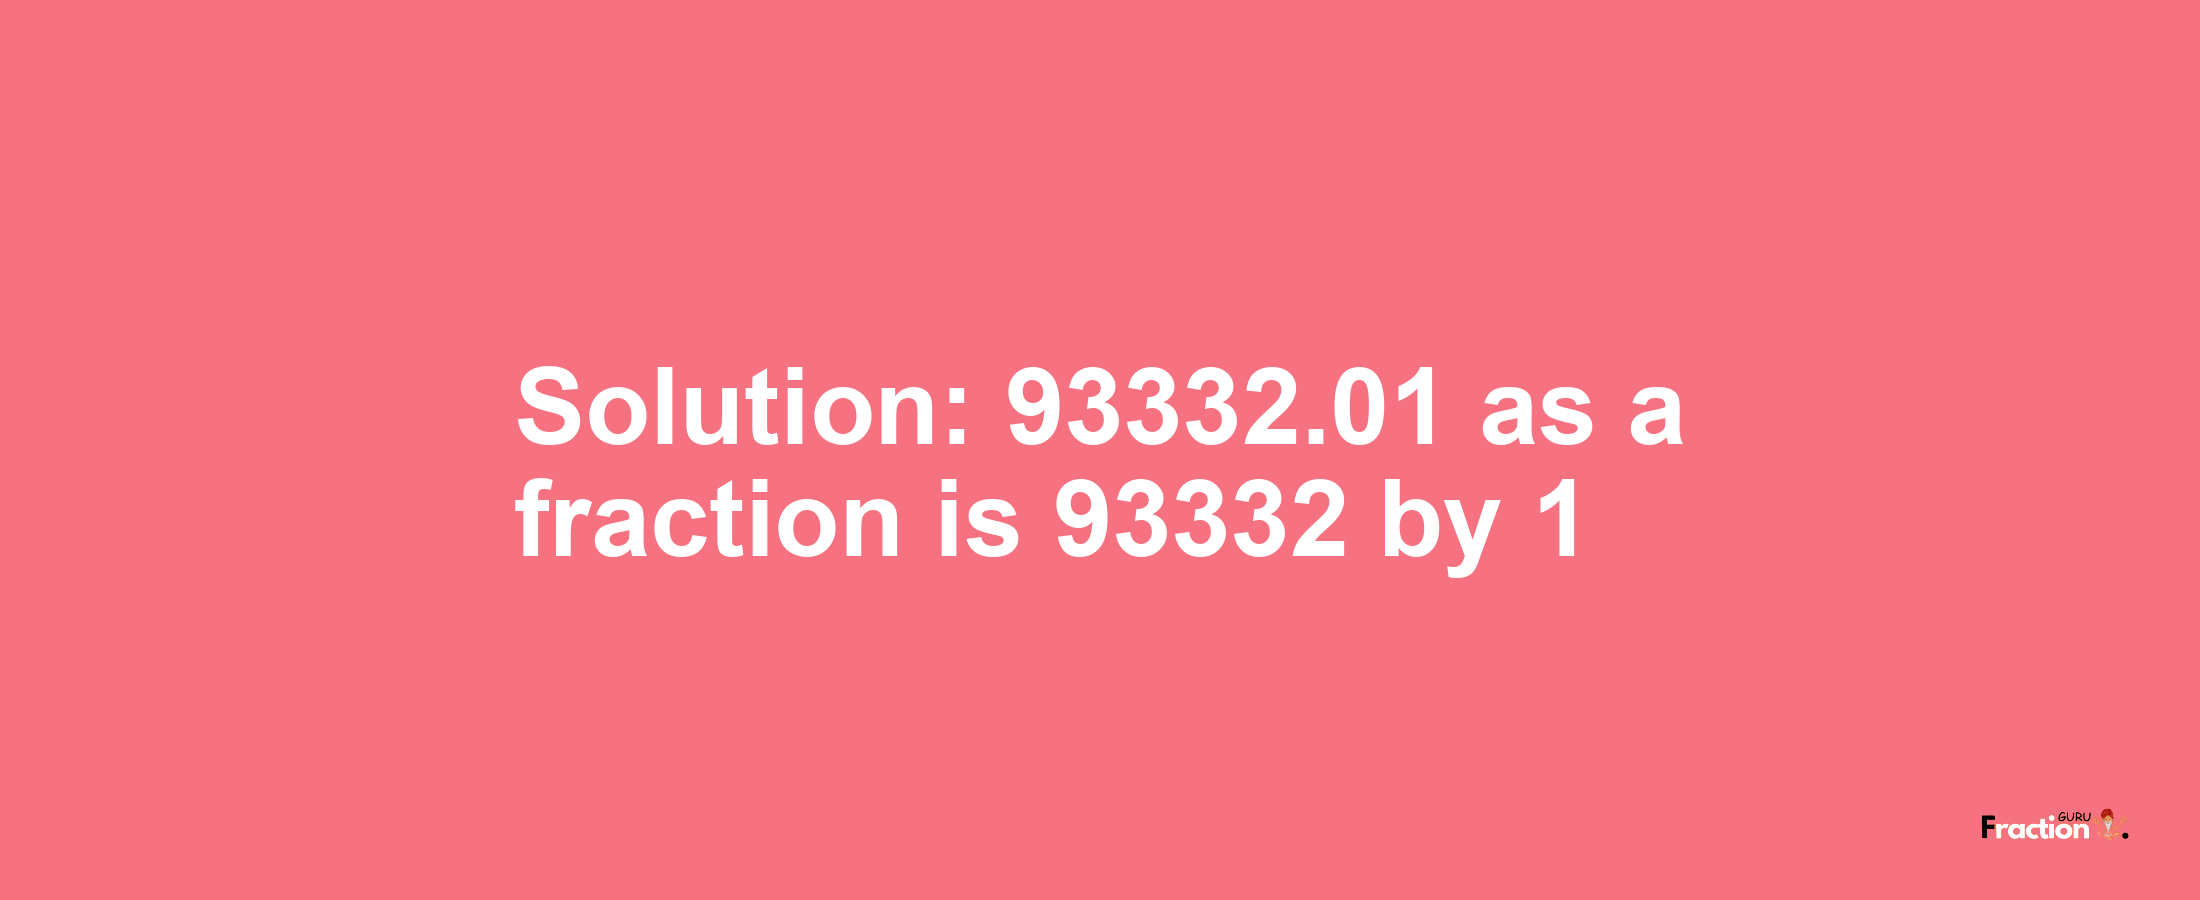 Solution:93332.01 as a fraction is 93332/1